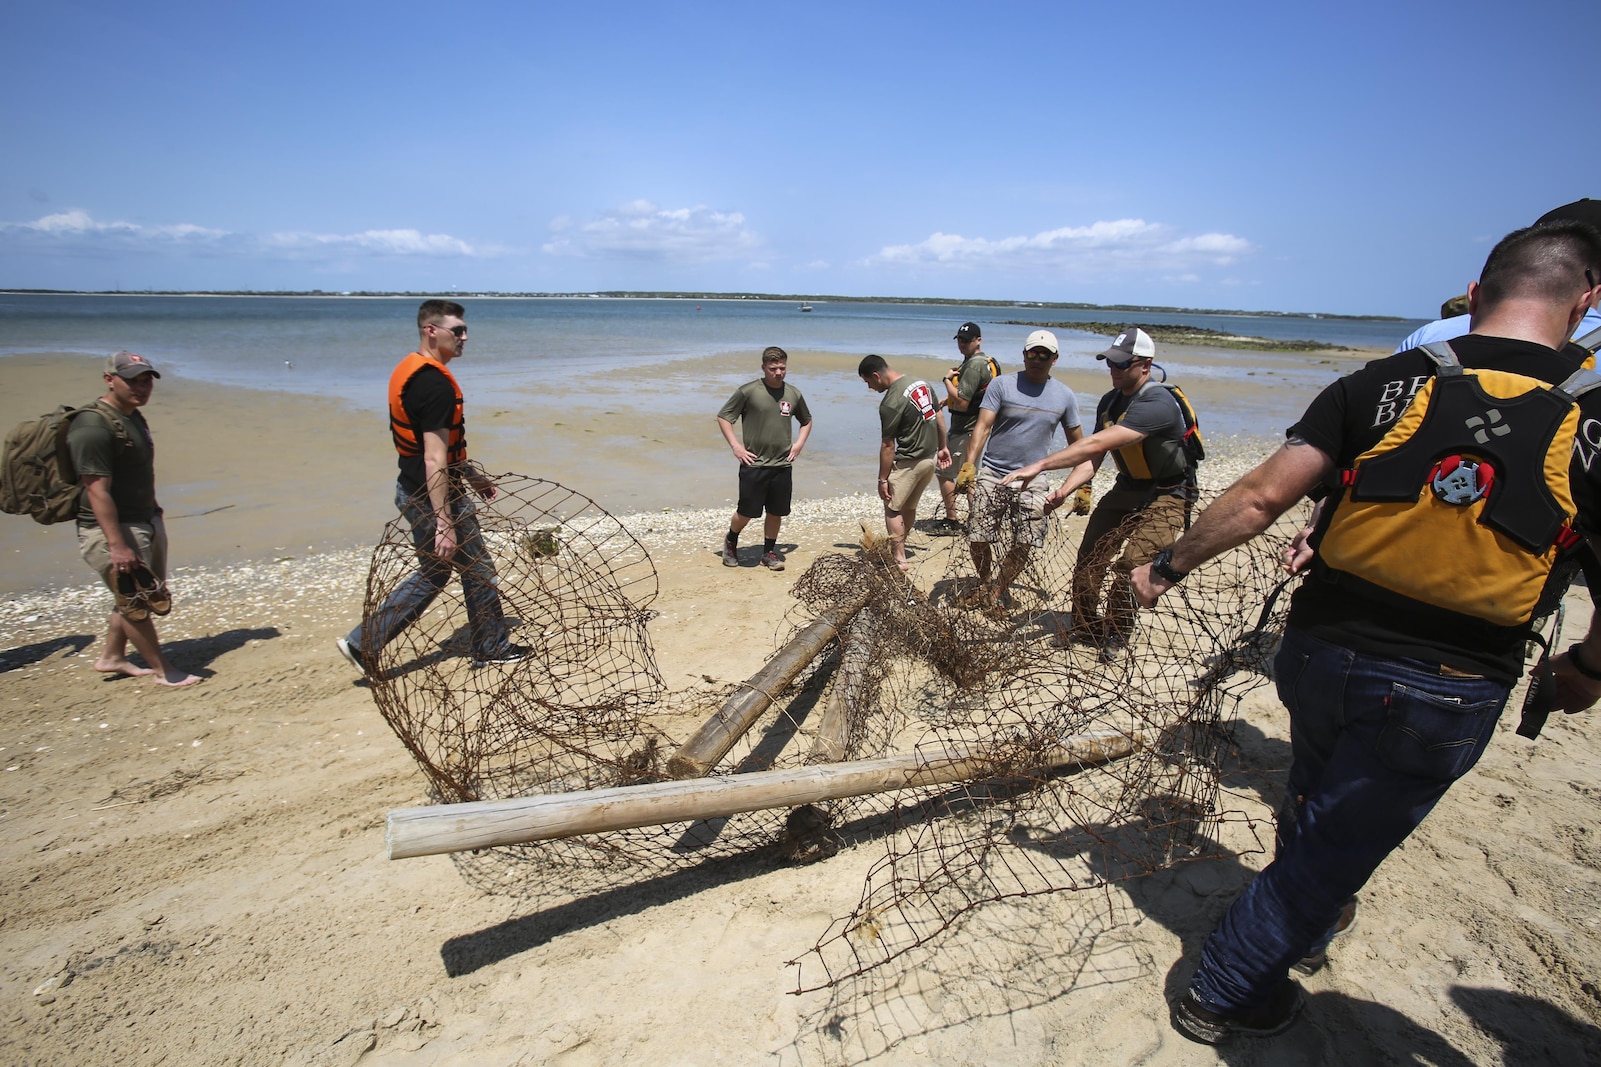 Clearing debris from the beach, Marines from 2nd Radio Battalion and 2nd Law Enforcement Battalion drag a fence to a ferry for removal as part of a beach clean-up of Shackleford Banks Island April 21, 2016. The Marines worked in cooperation with the Single Marine Program for transportation and the National Park service for removal of the trash. (U.S. Marine Corps photo by Lance Cpl. Miranda Faughn/Released)